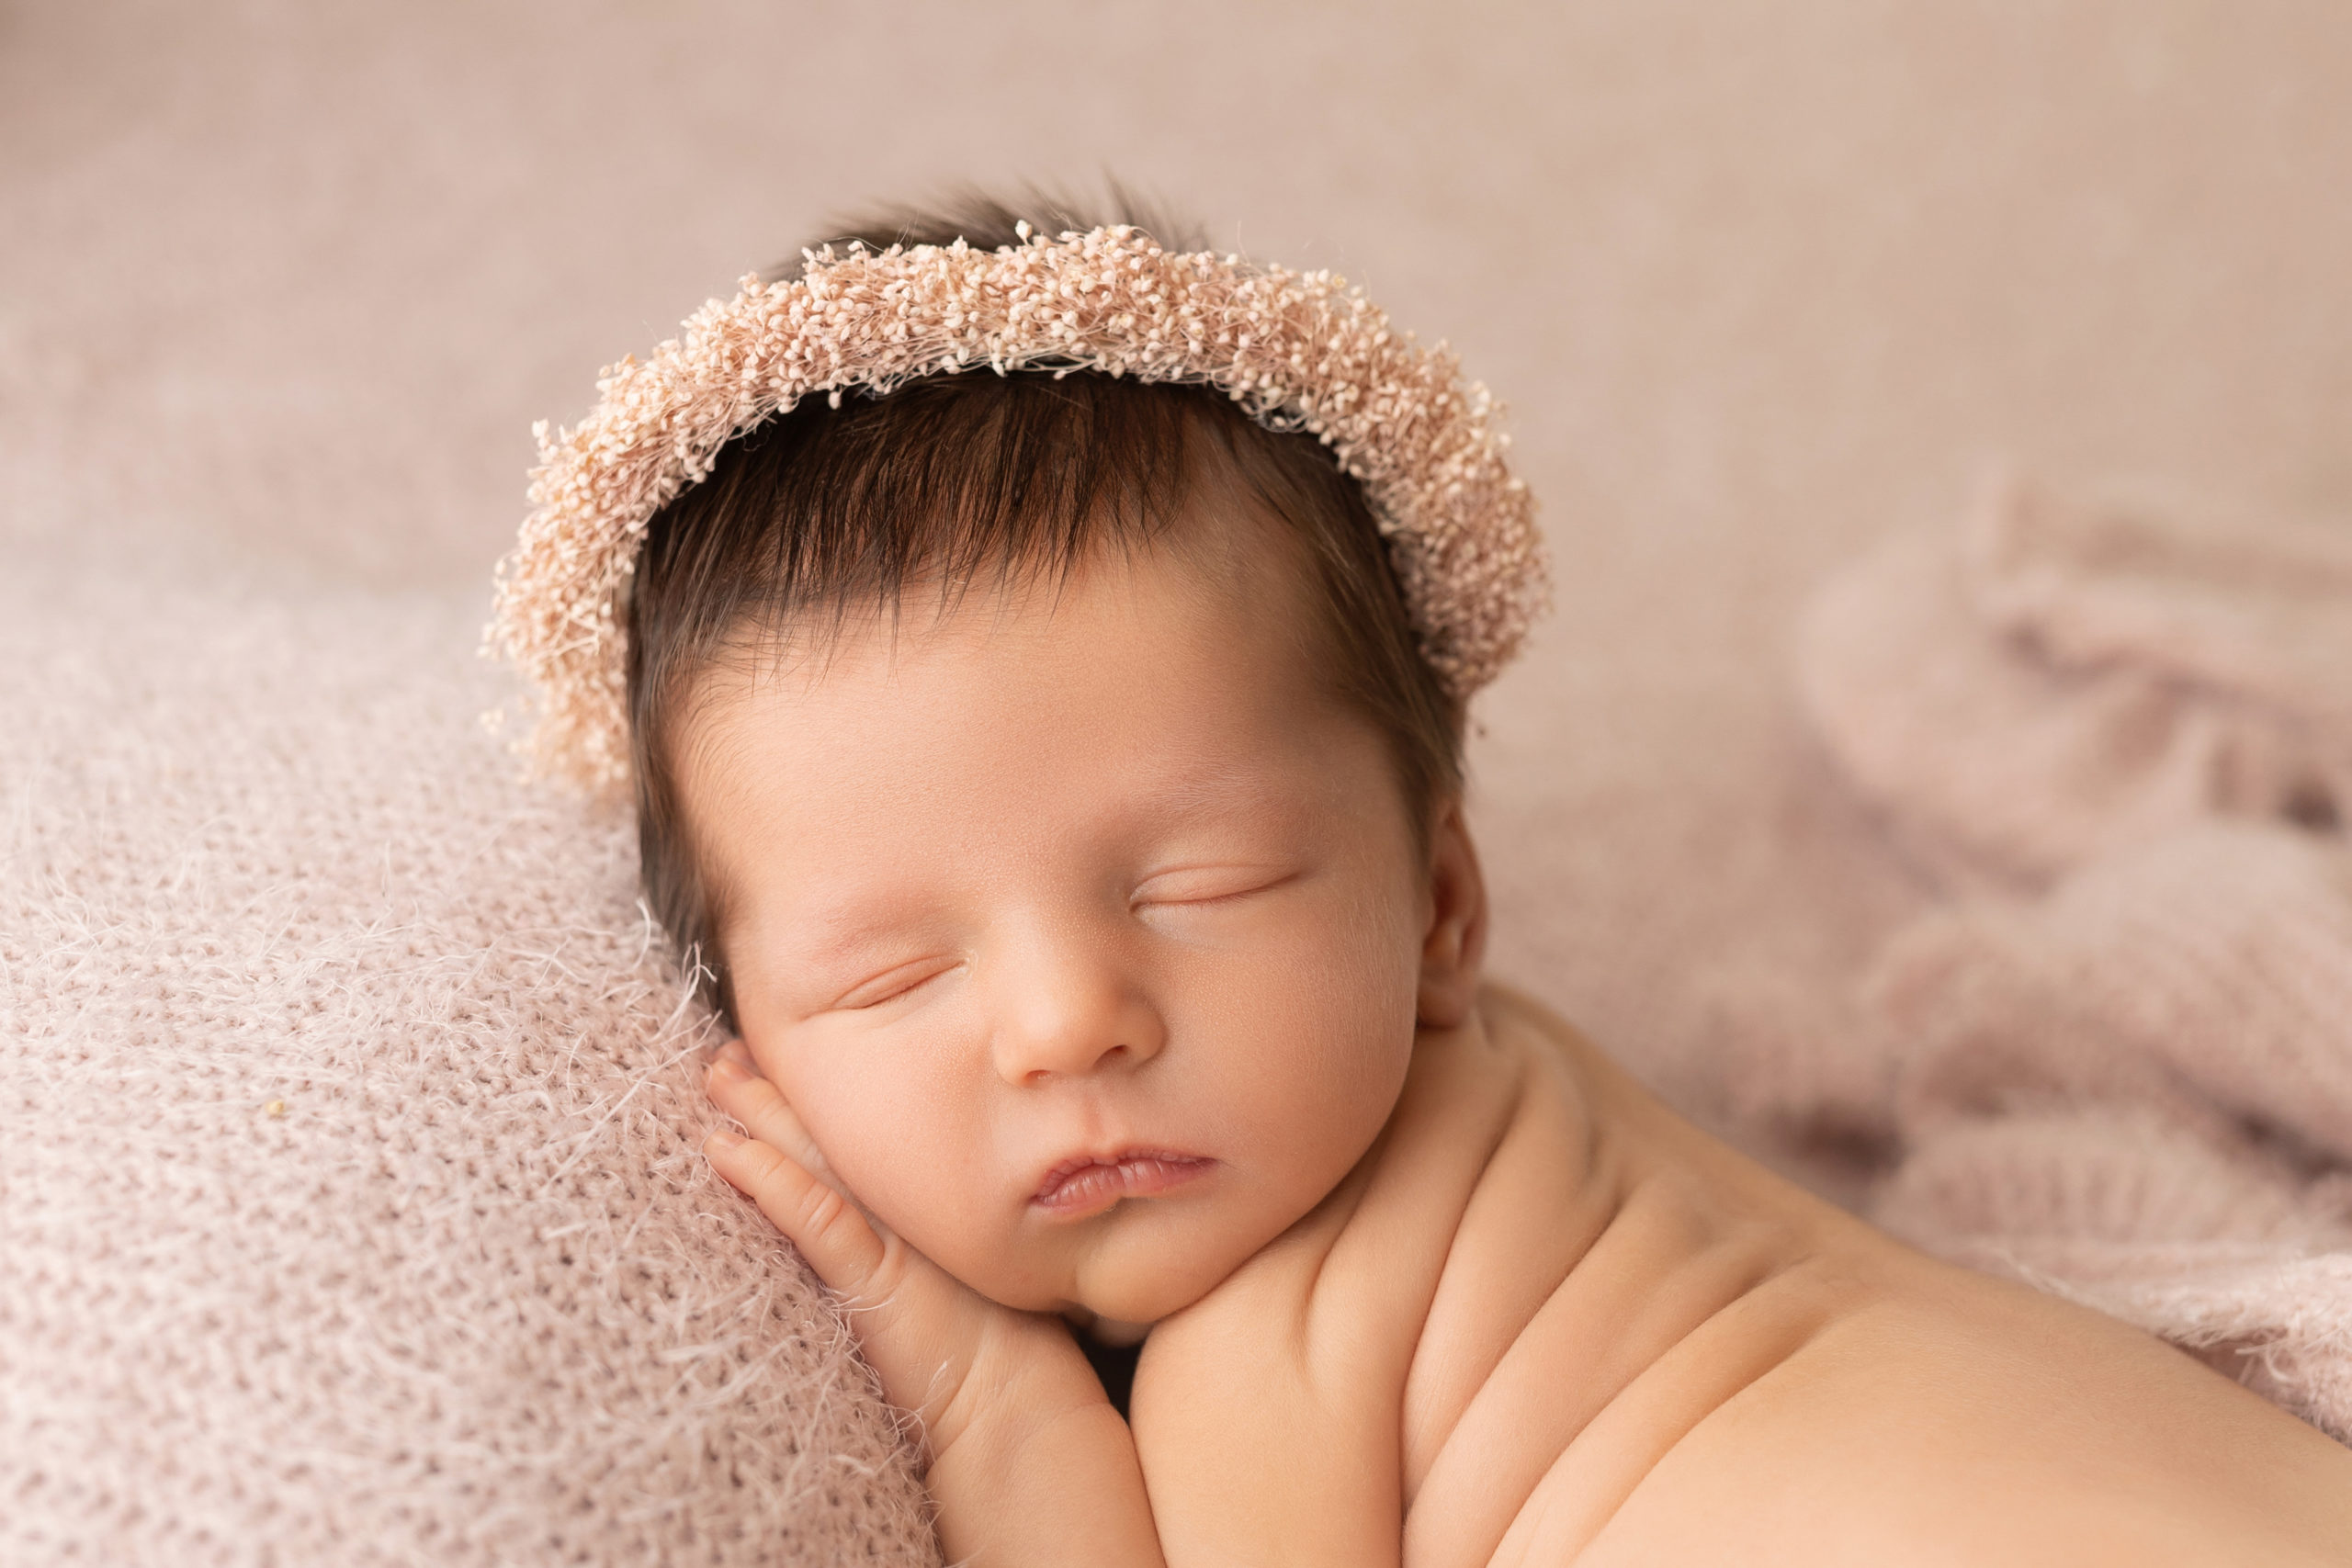 newborn baby girl sleeping with a flower crown Daycare in Wauwatosa